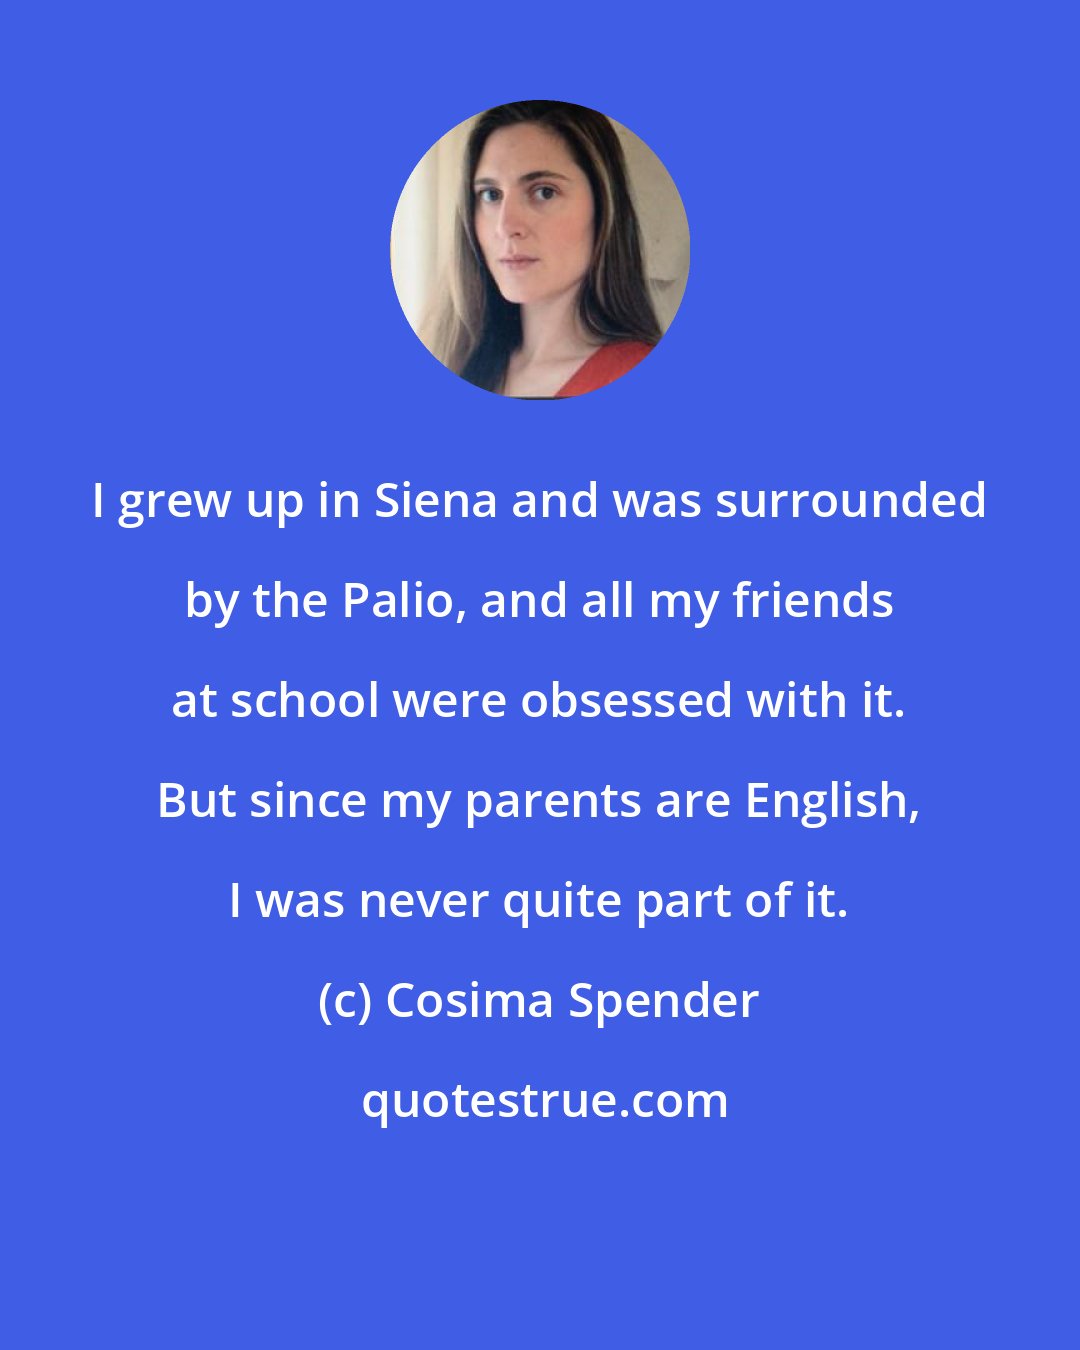 Cosima Spender: I grew up in Siena and was surrounded by the Palio, and all my friends at school were obsessed with it. But since my parents are English, I was never quite part of it.